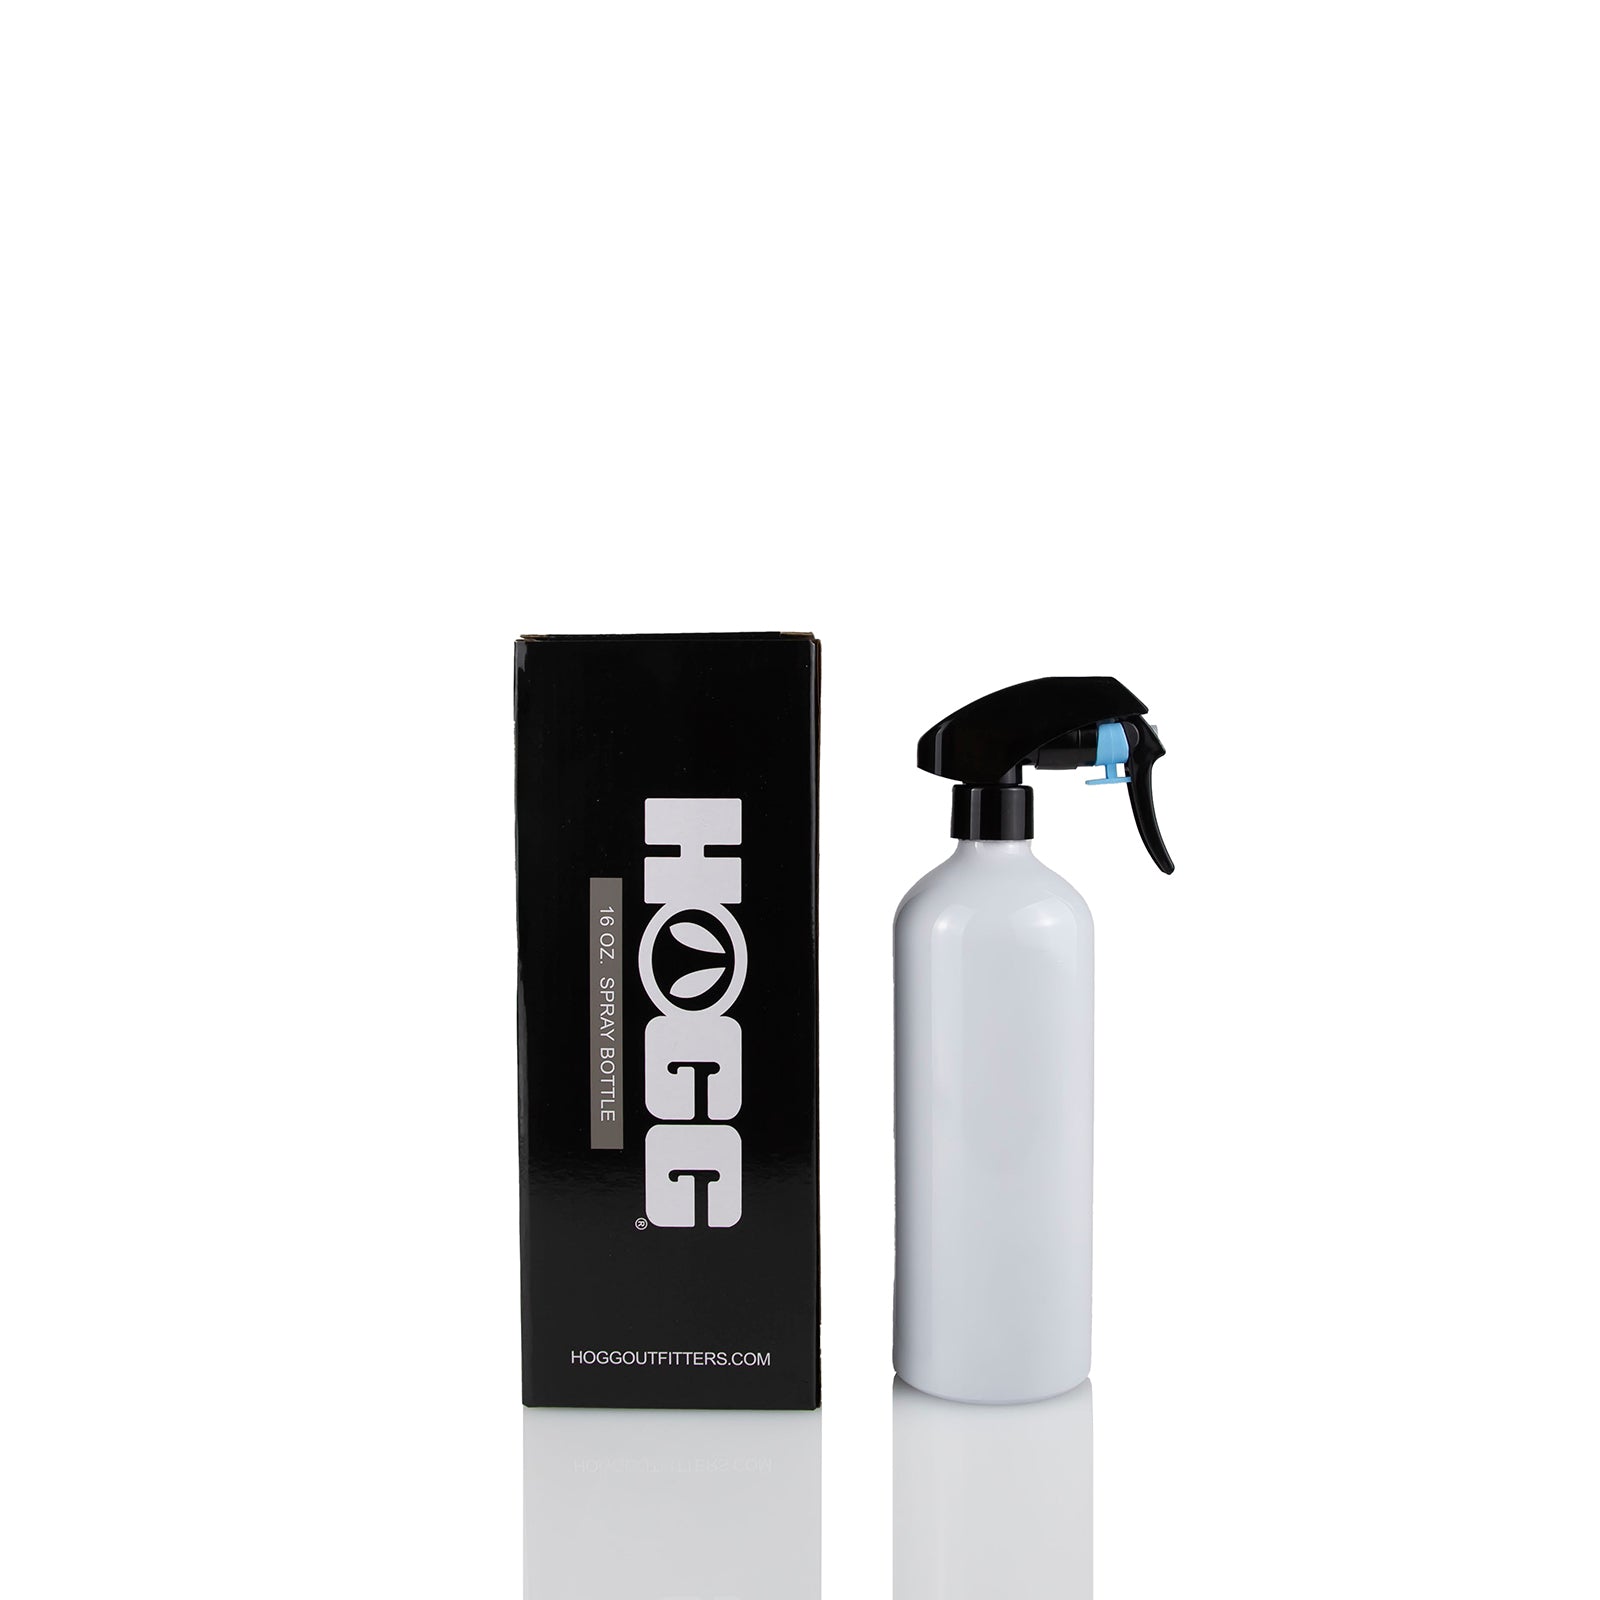 Subli+Mate Sublimation Spray Concentrate + Empty Spray Bottle Kit